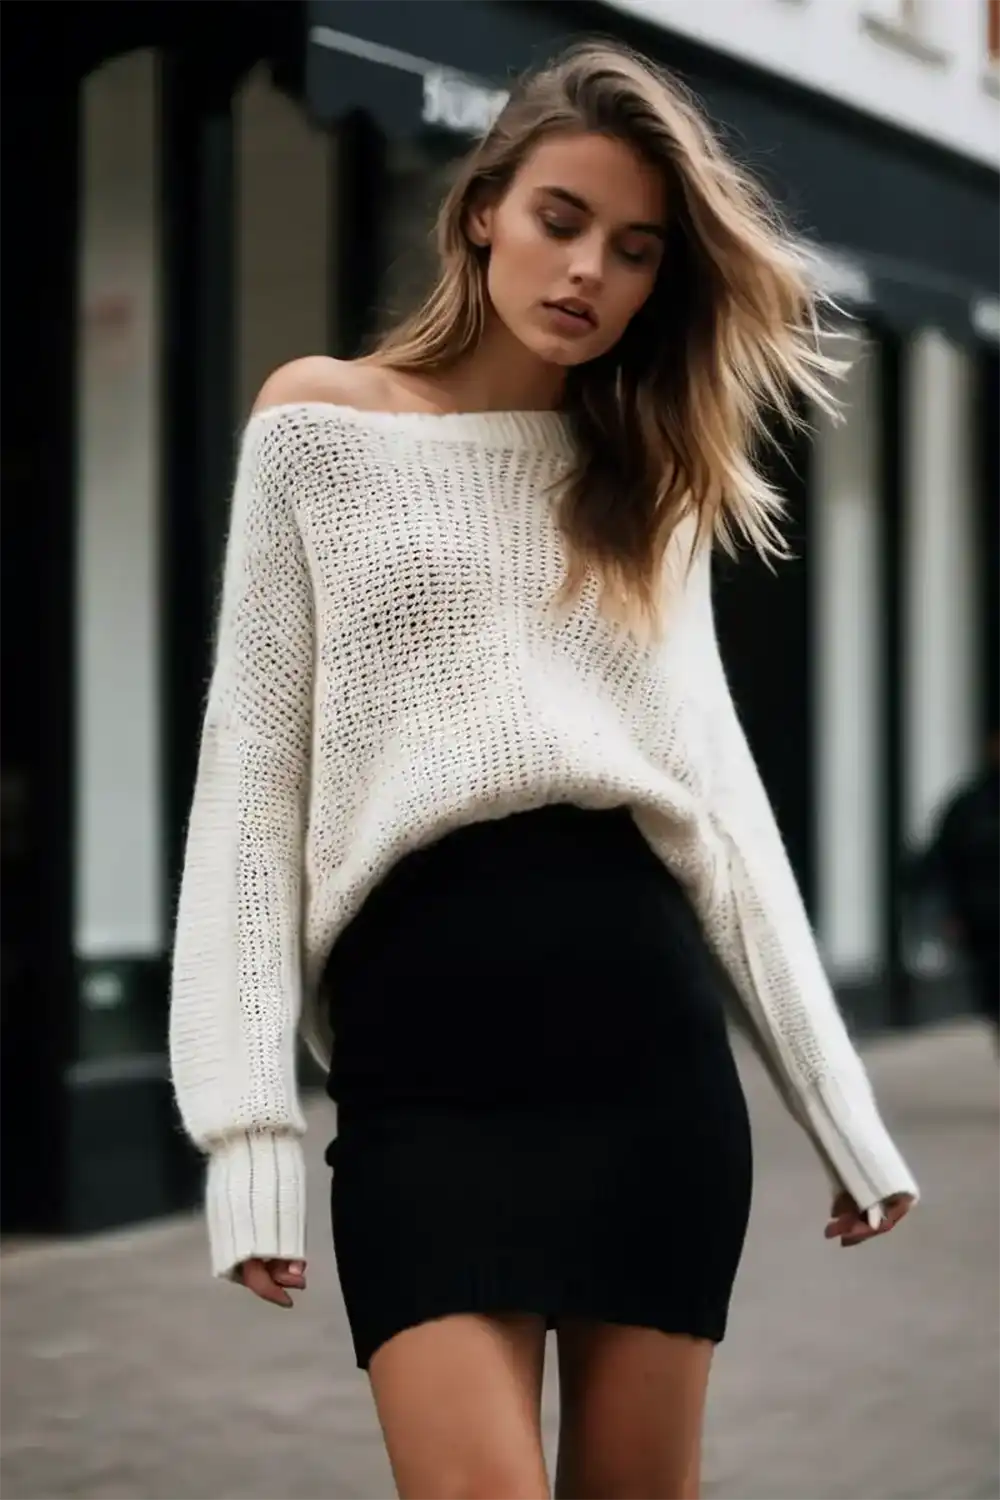 Girl wearing a black skirt with an oversized sweater